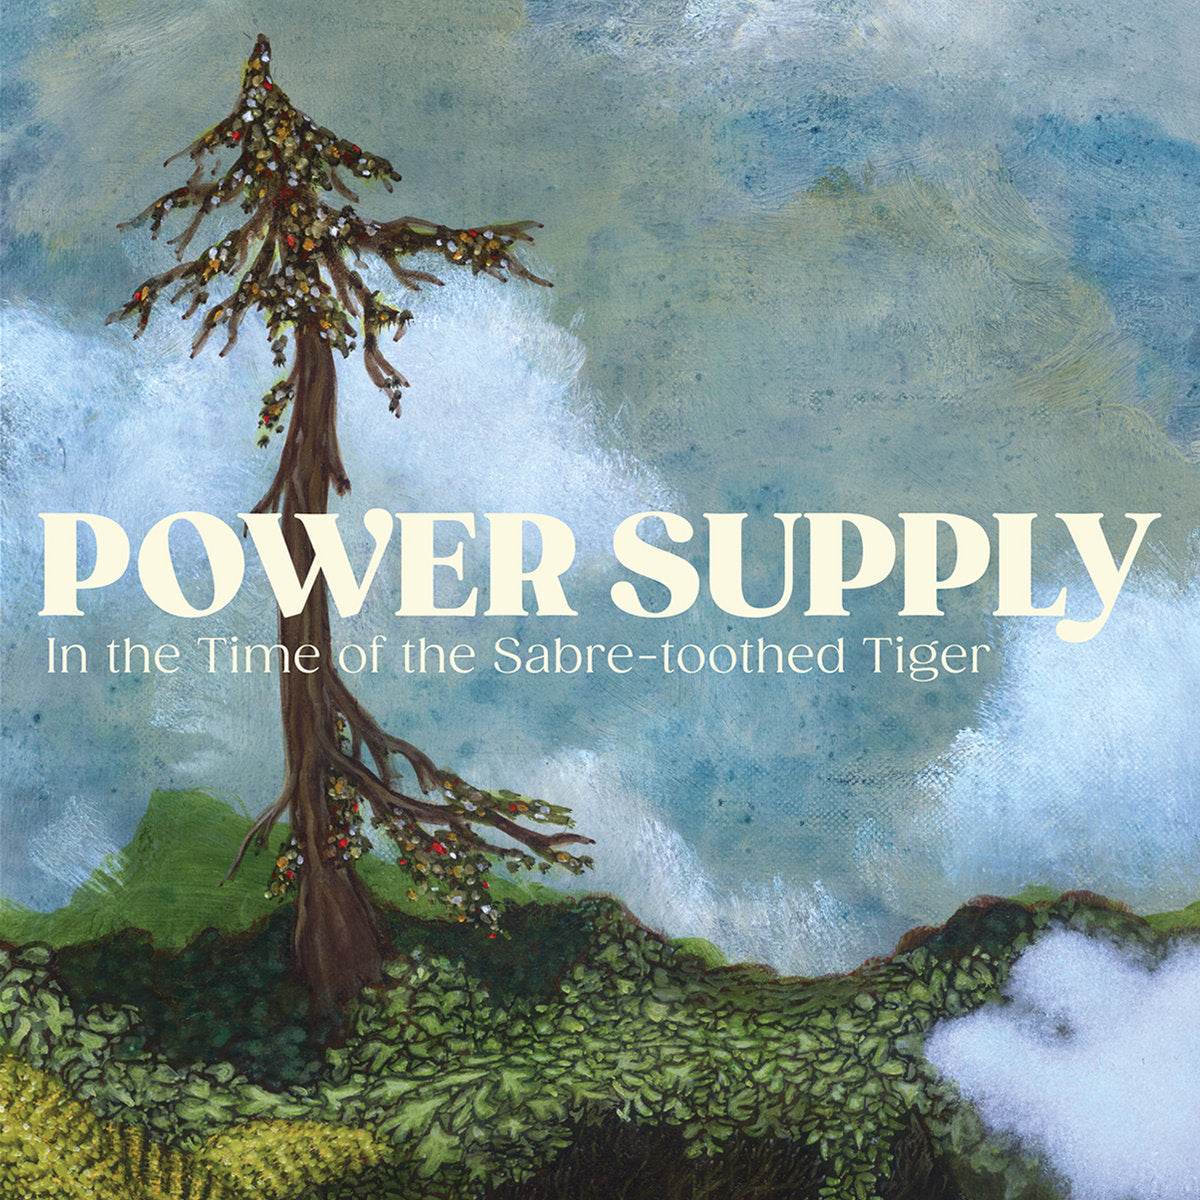 POWER SUPPLY - "IN THE TIME OF THE SABRE-TOOTHED TIGER" LP